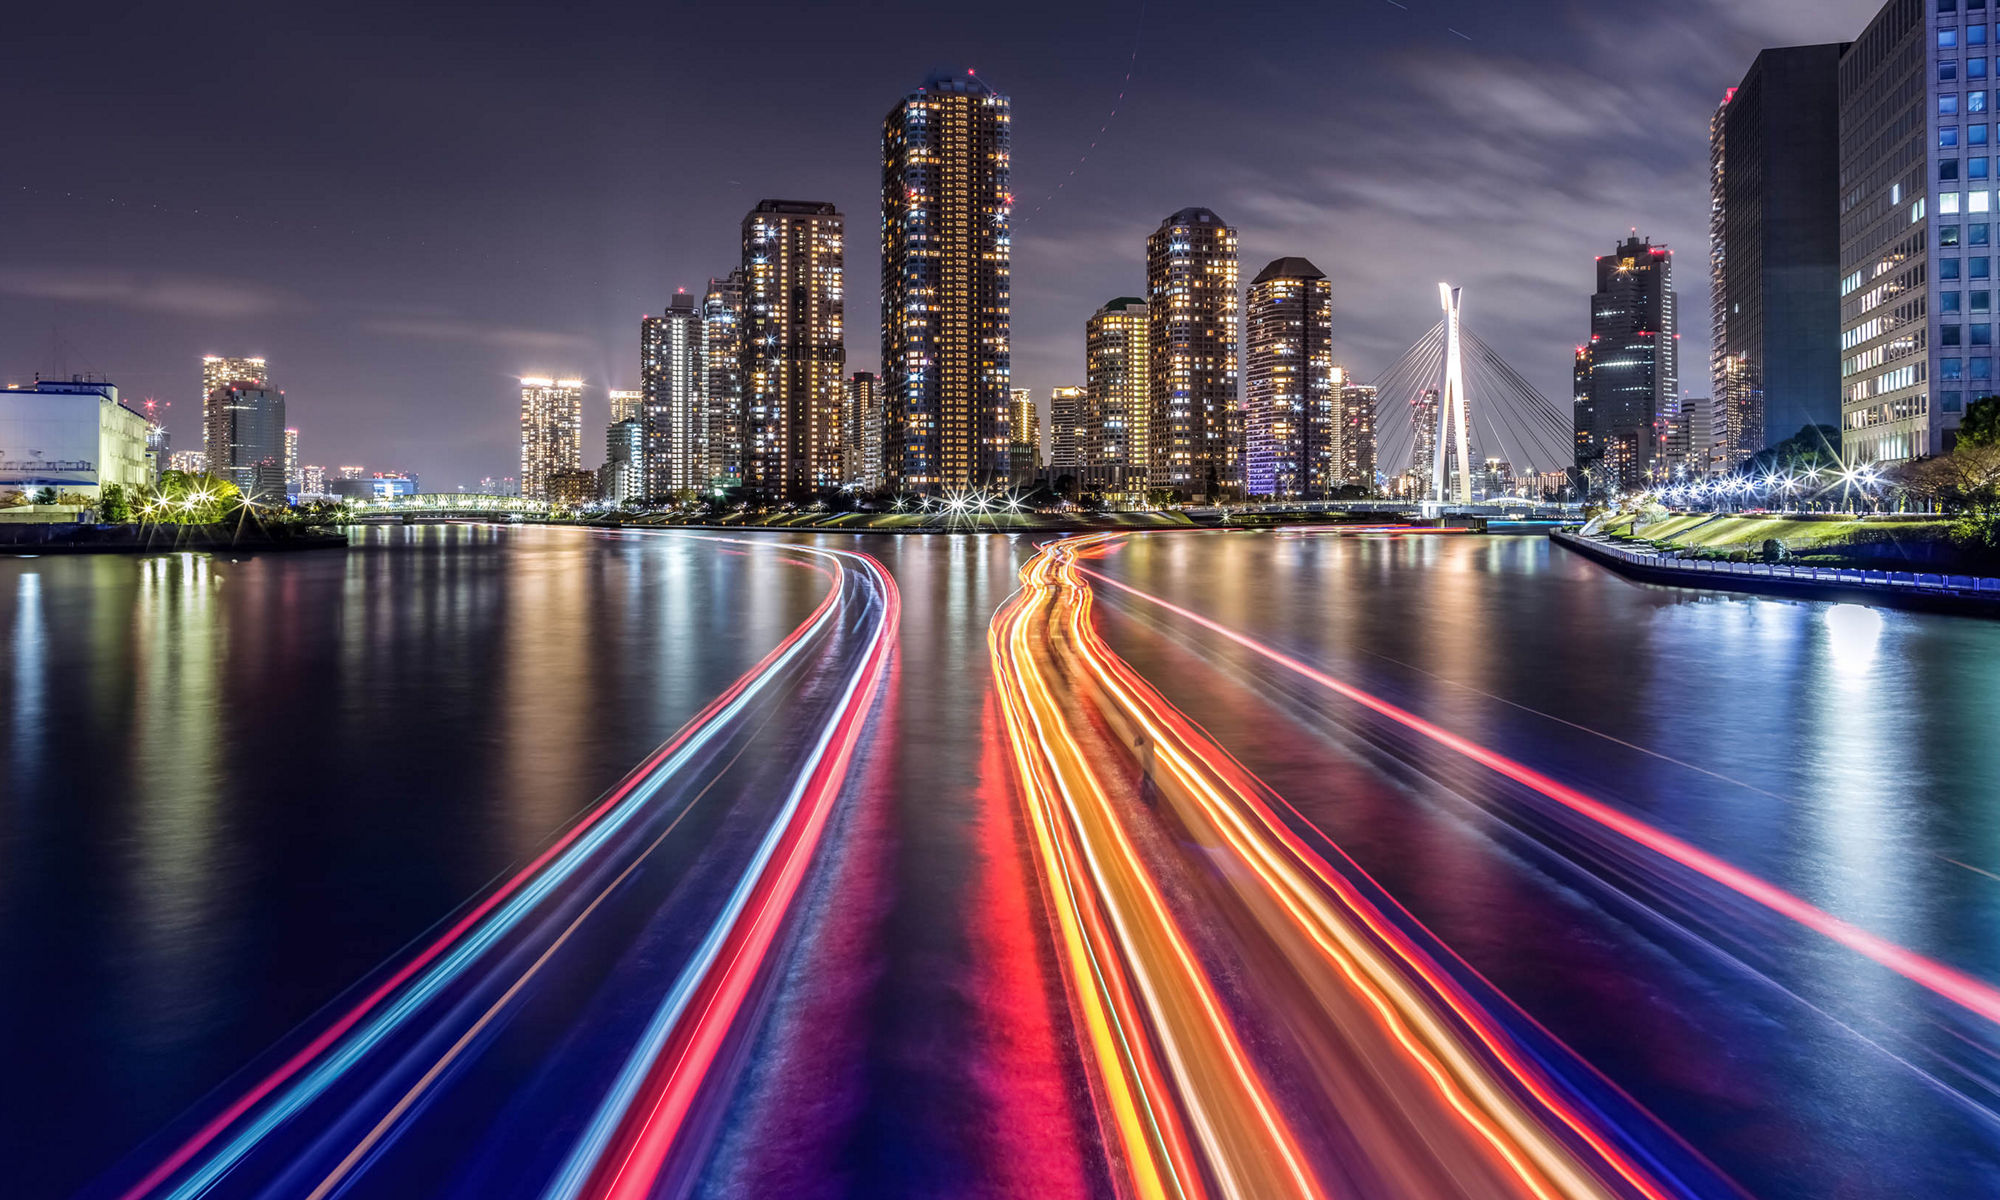 Tokyo skyline in Tsukishima aera, with high tall residential buildings illuminated over Sumida river with houseboat light trails in koto ward, Japan in the summer.Eitai bridge illumination reflection in the water and buildings light make a Romantic atmosphere.